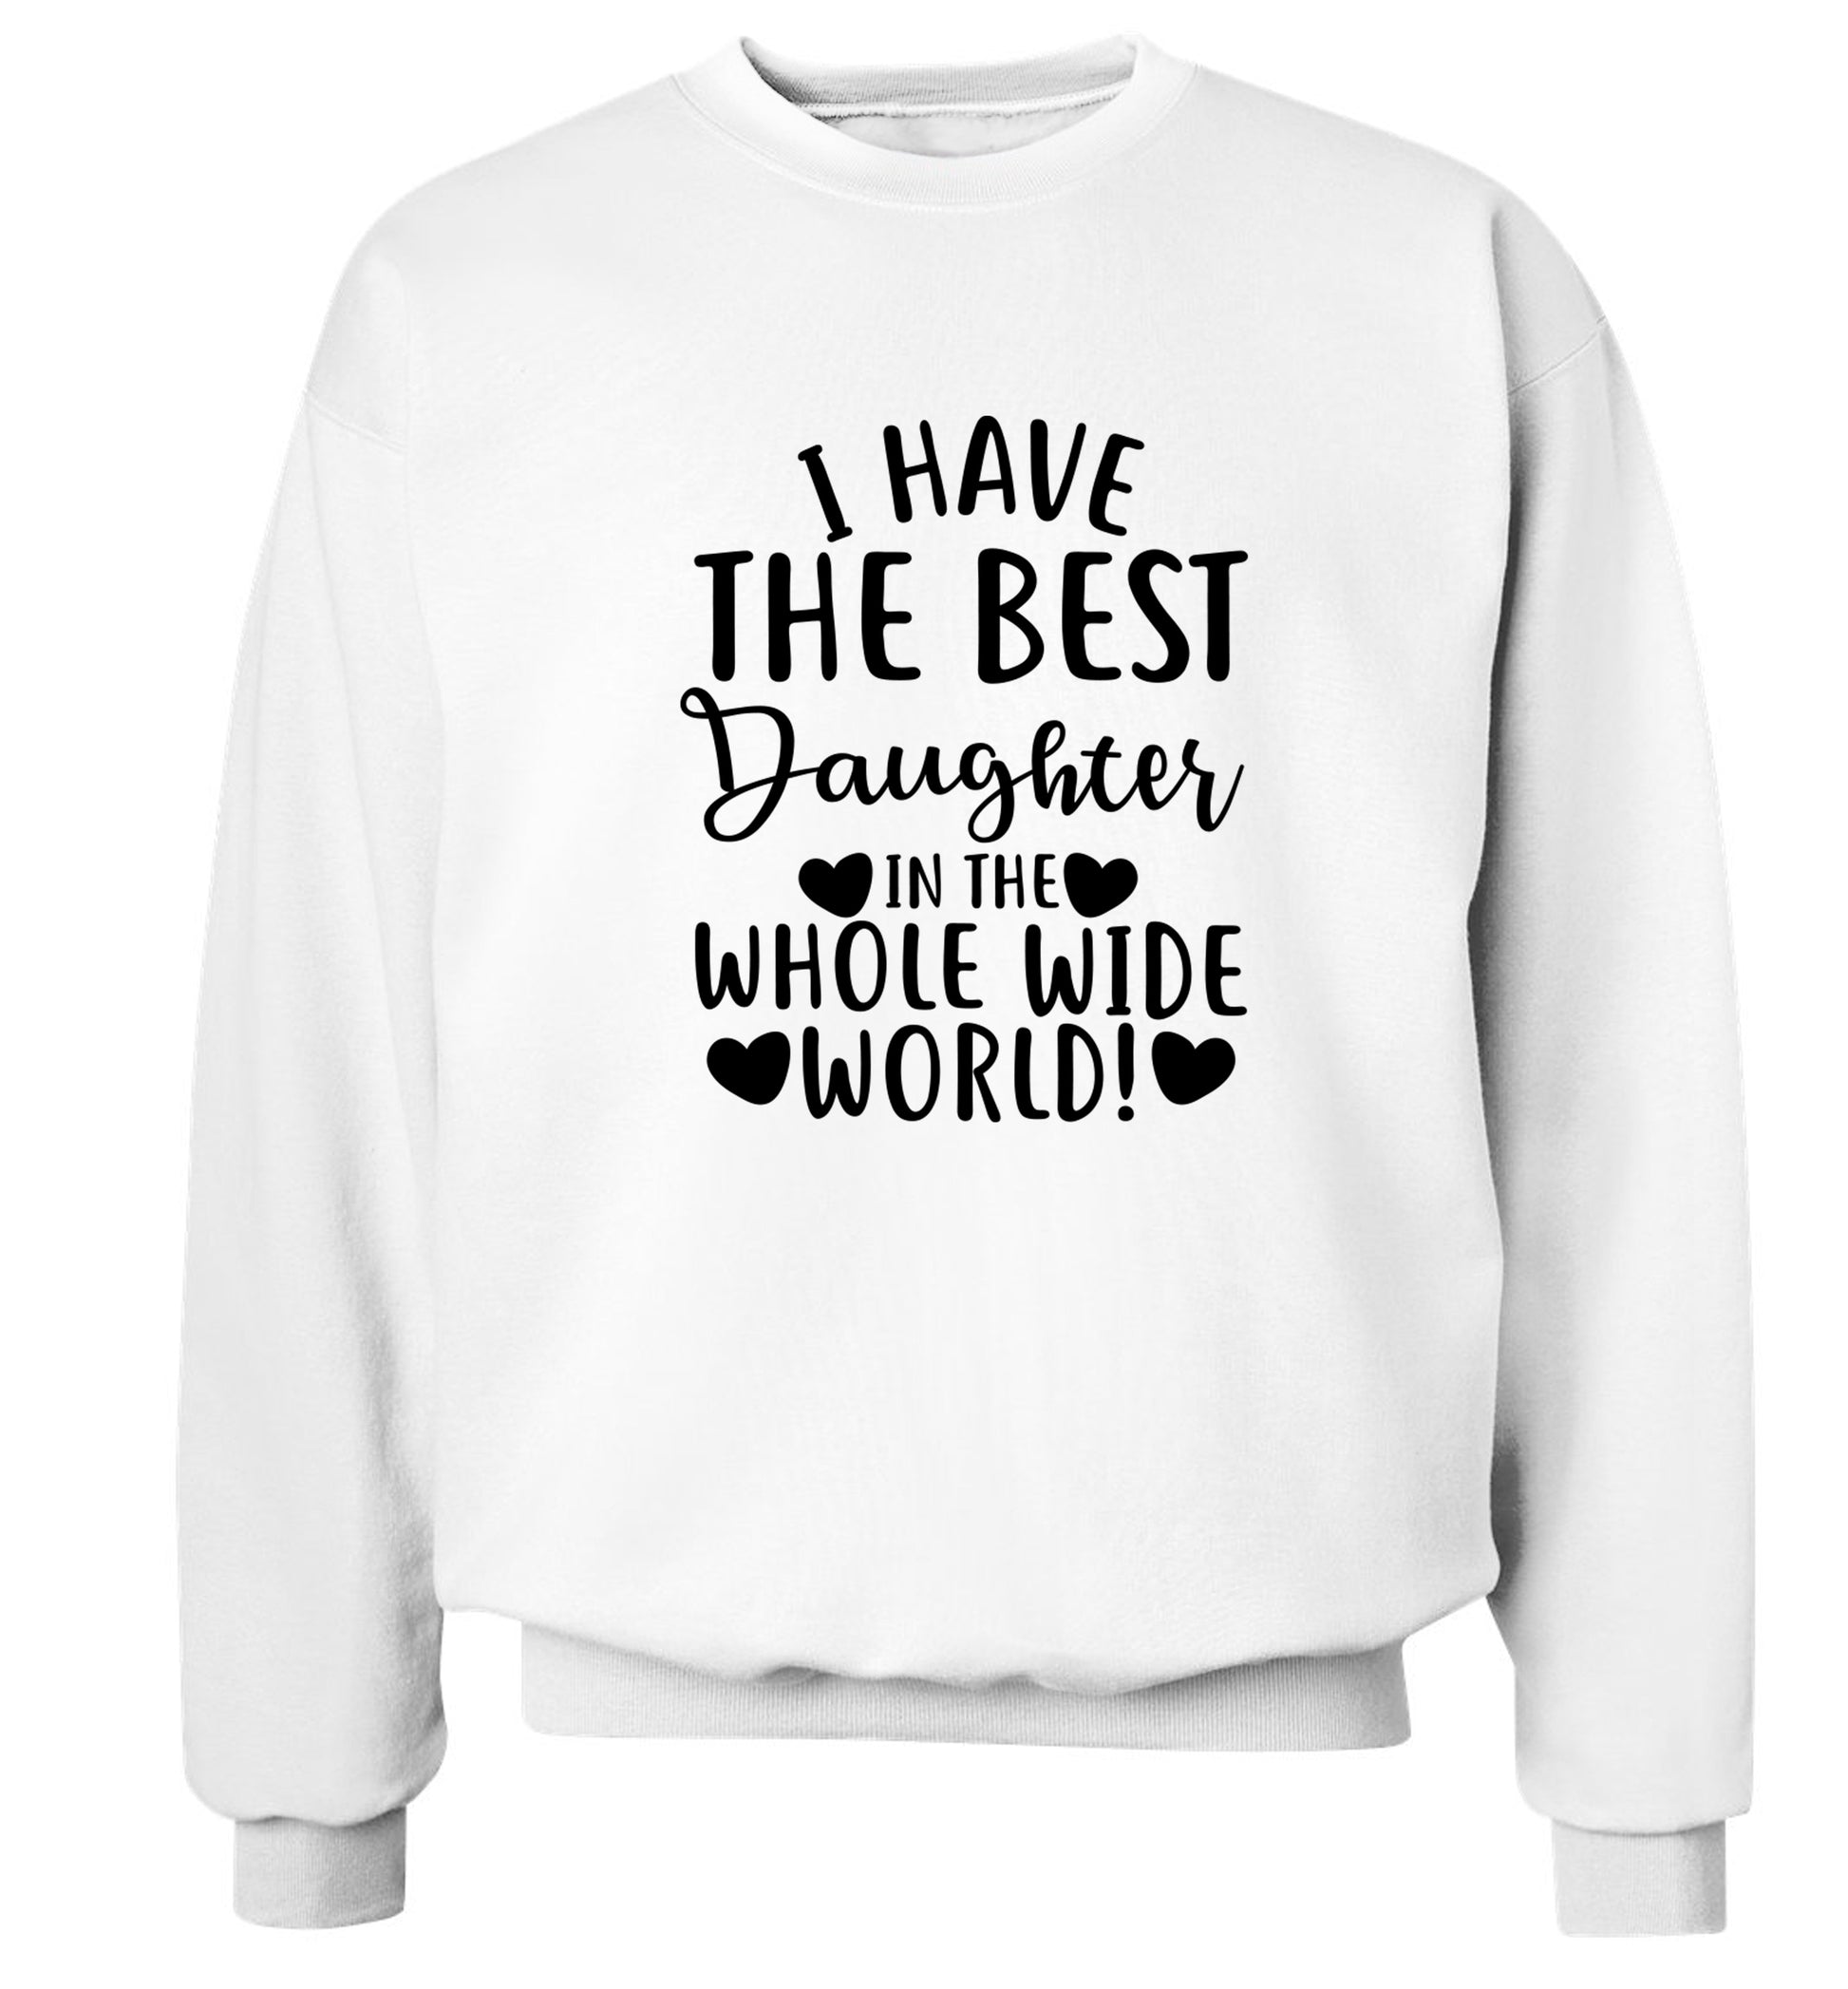 I have the best daughter in the whole wide world! Adult's unisex white Sweater 2XL